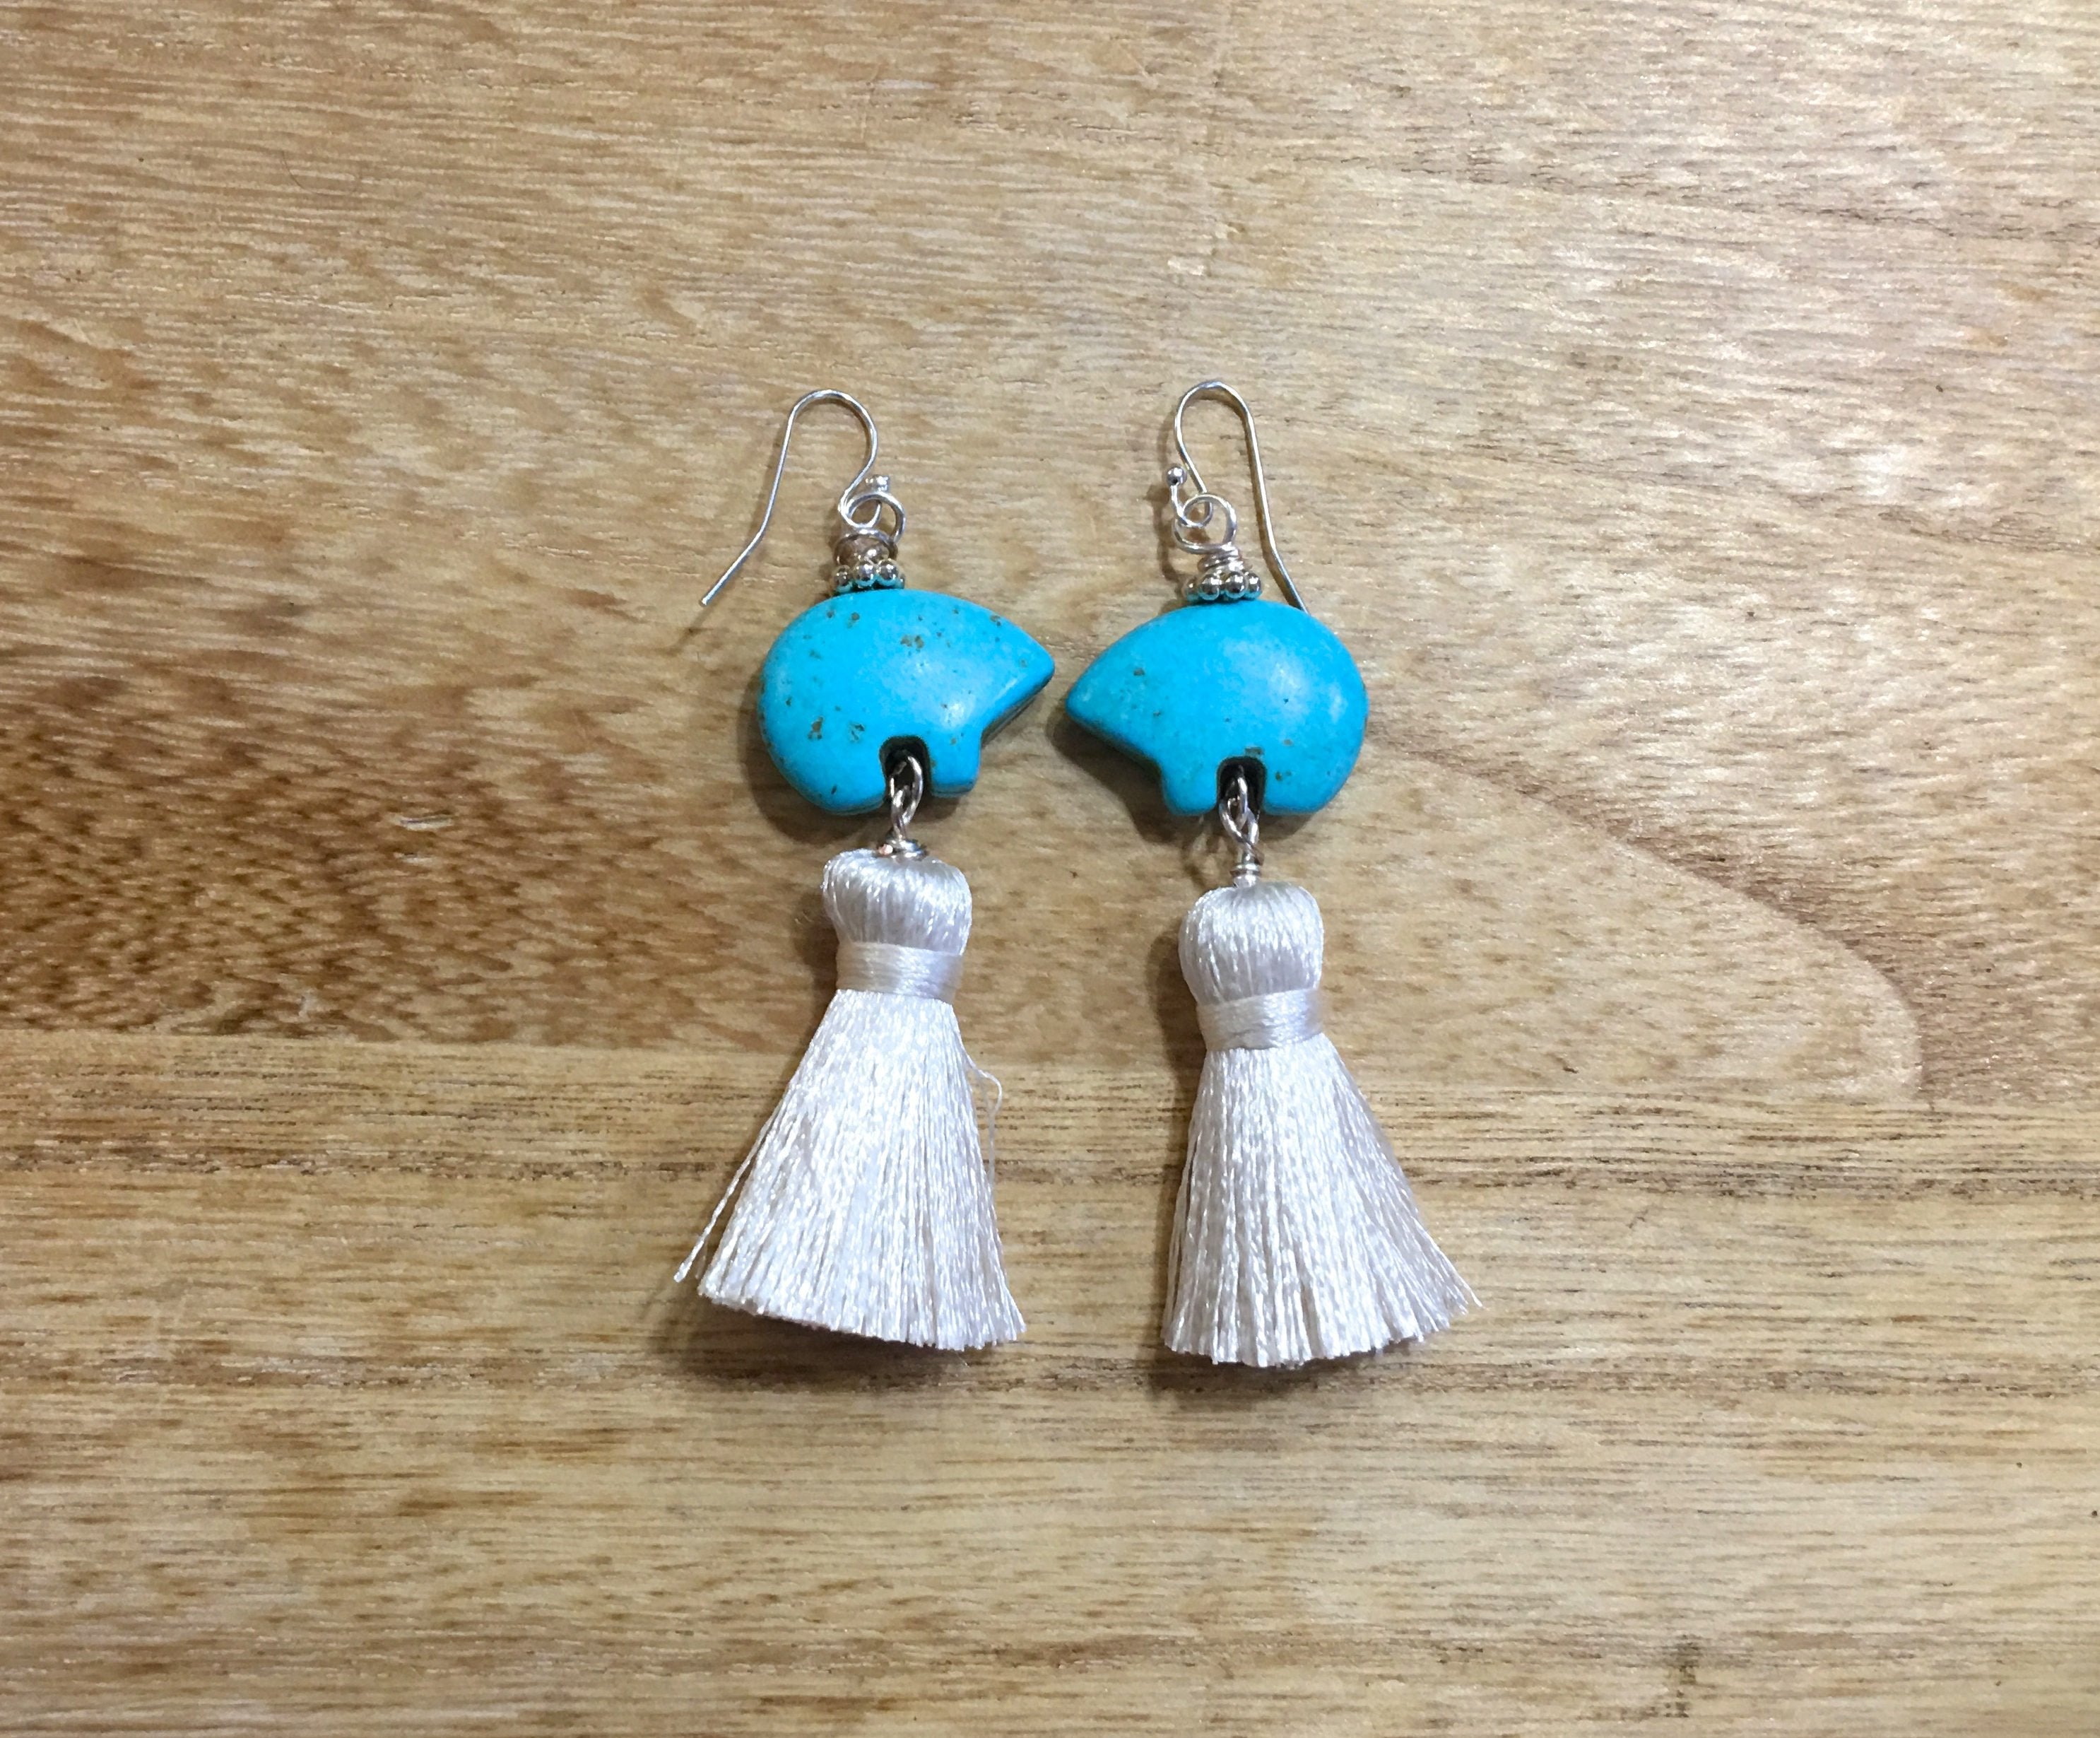 Earrings with Short Tassels (4 Pairs, you choose 1)